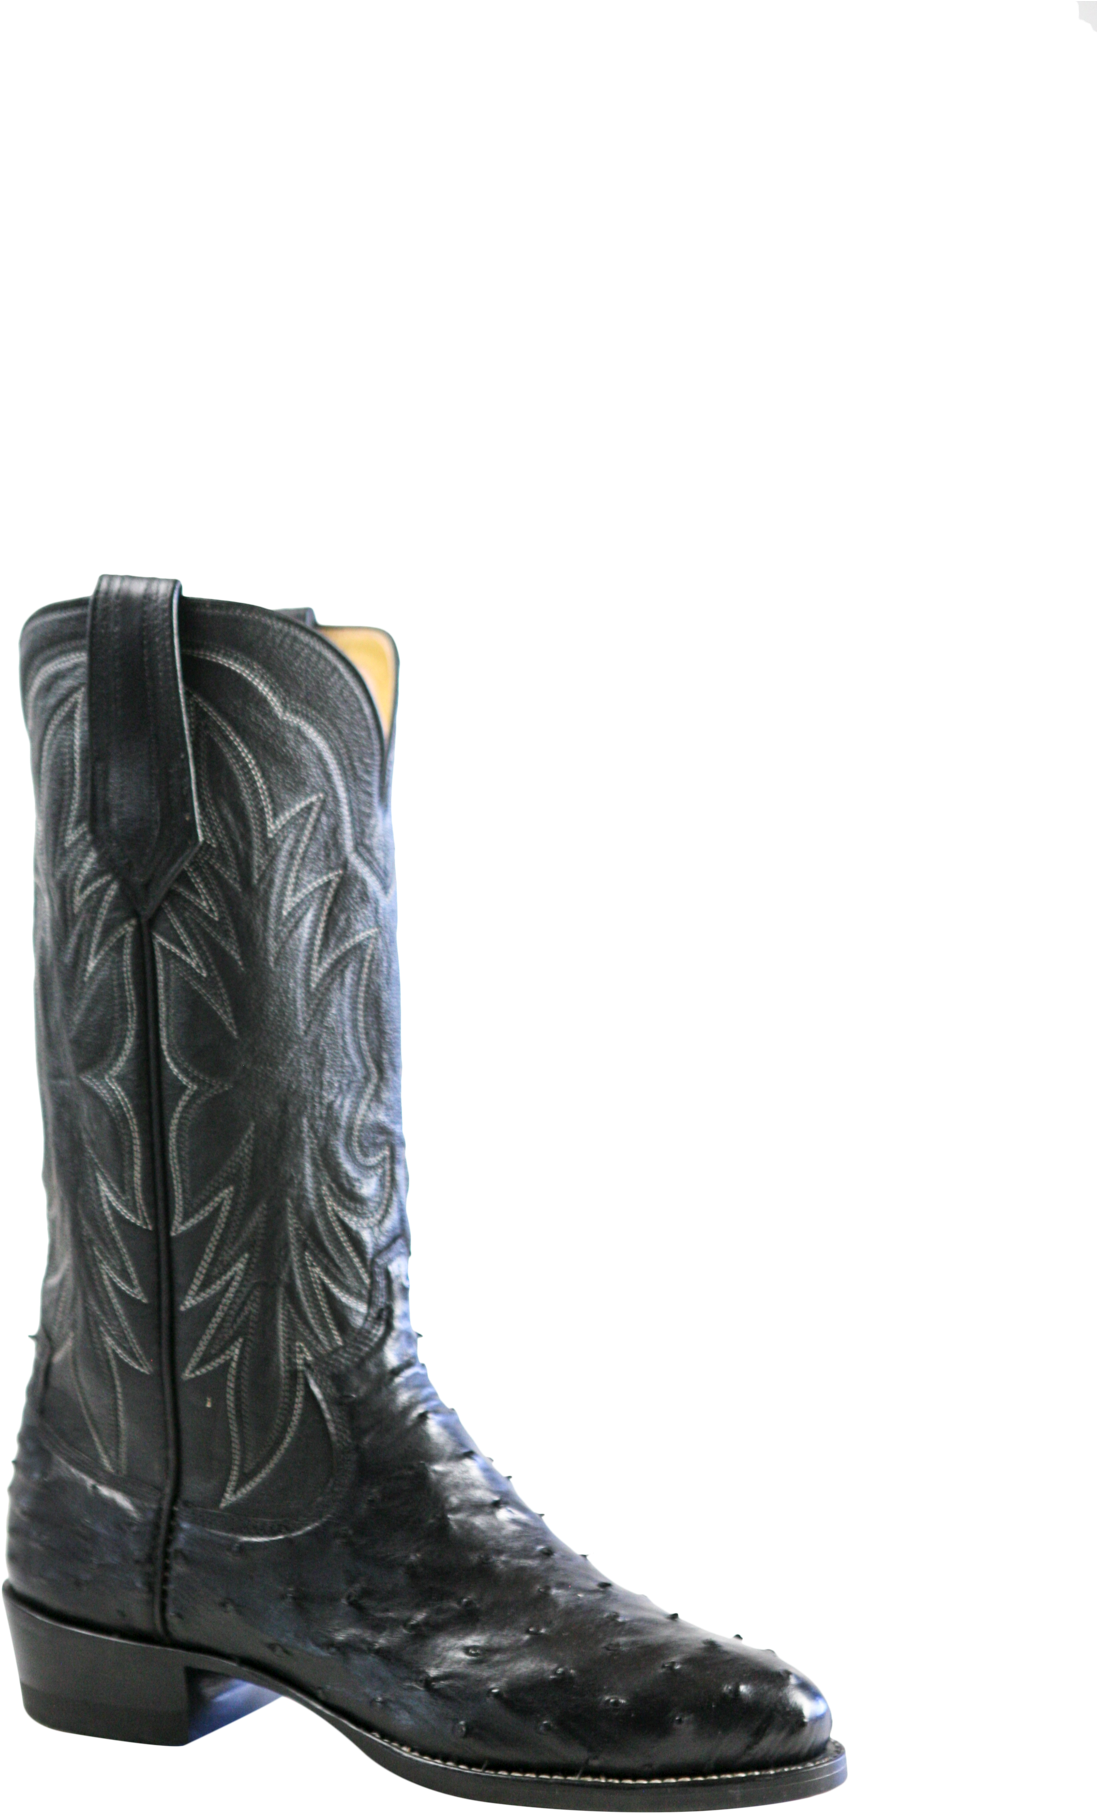 A Black Cowboy Boot With White Stitching